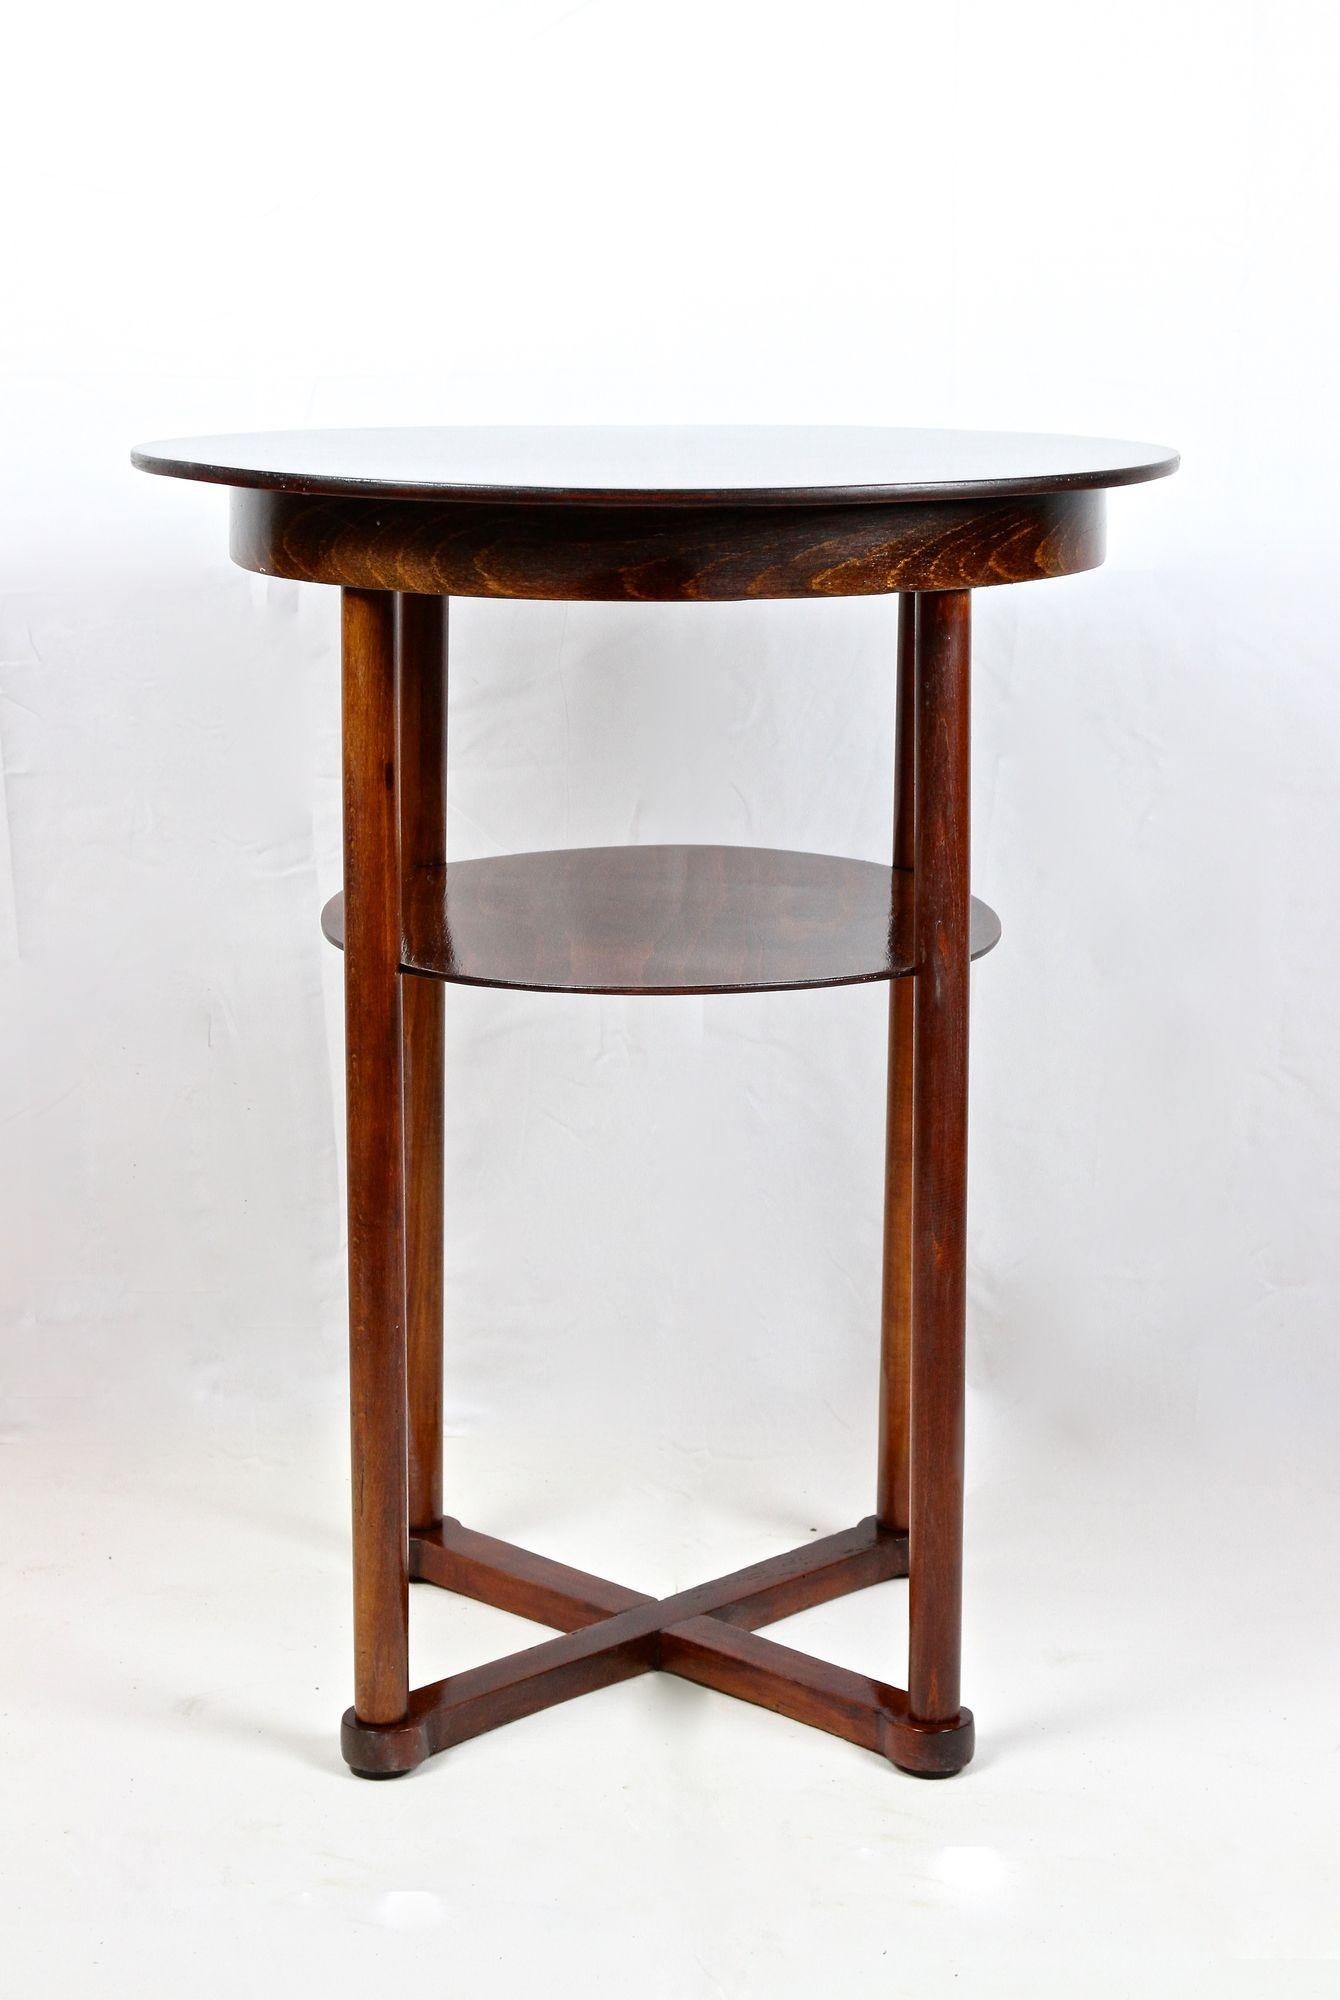 Outstanding Art Nouveau Bentwood Side Table from the renowed company of MUNDUS Vienna in Austria. Designed around 1902 by the world renowed Austrian architect, designer and founder of the 